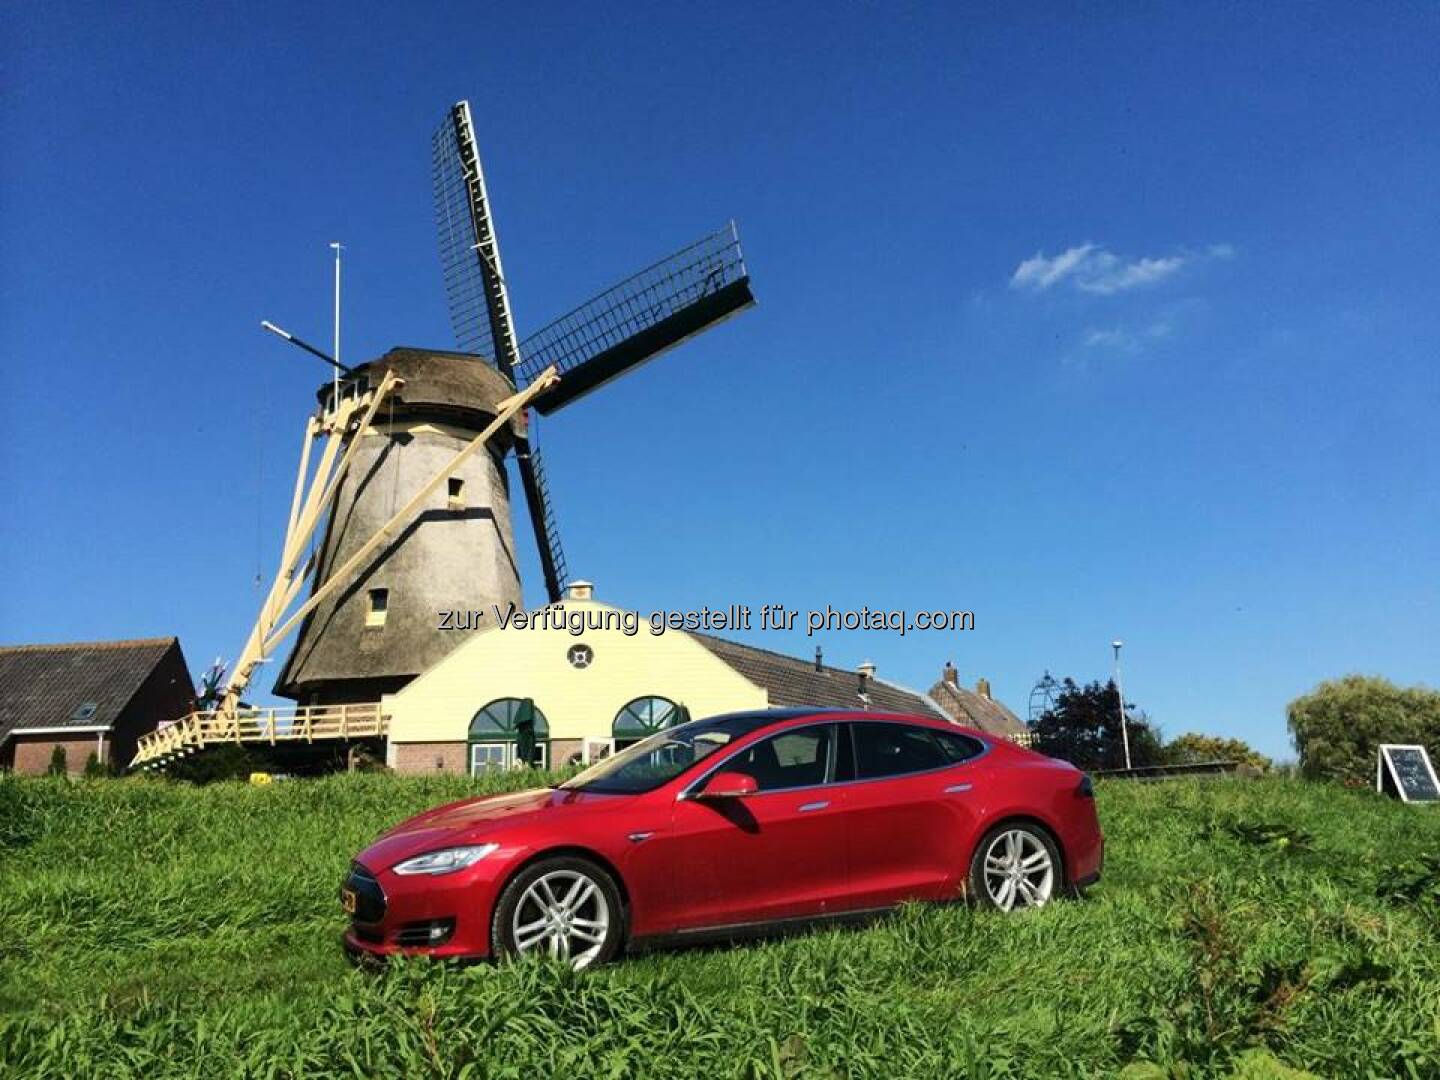 Windmühle :Mobility with green energy: Model S meets windmill in The Netherlands. Photo by @vanwuijtswinkel  Source: http://facebook.com/teslamotors